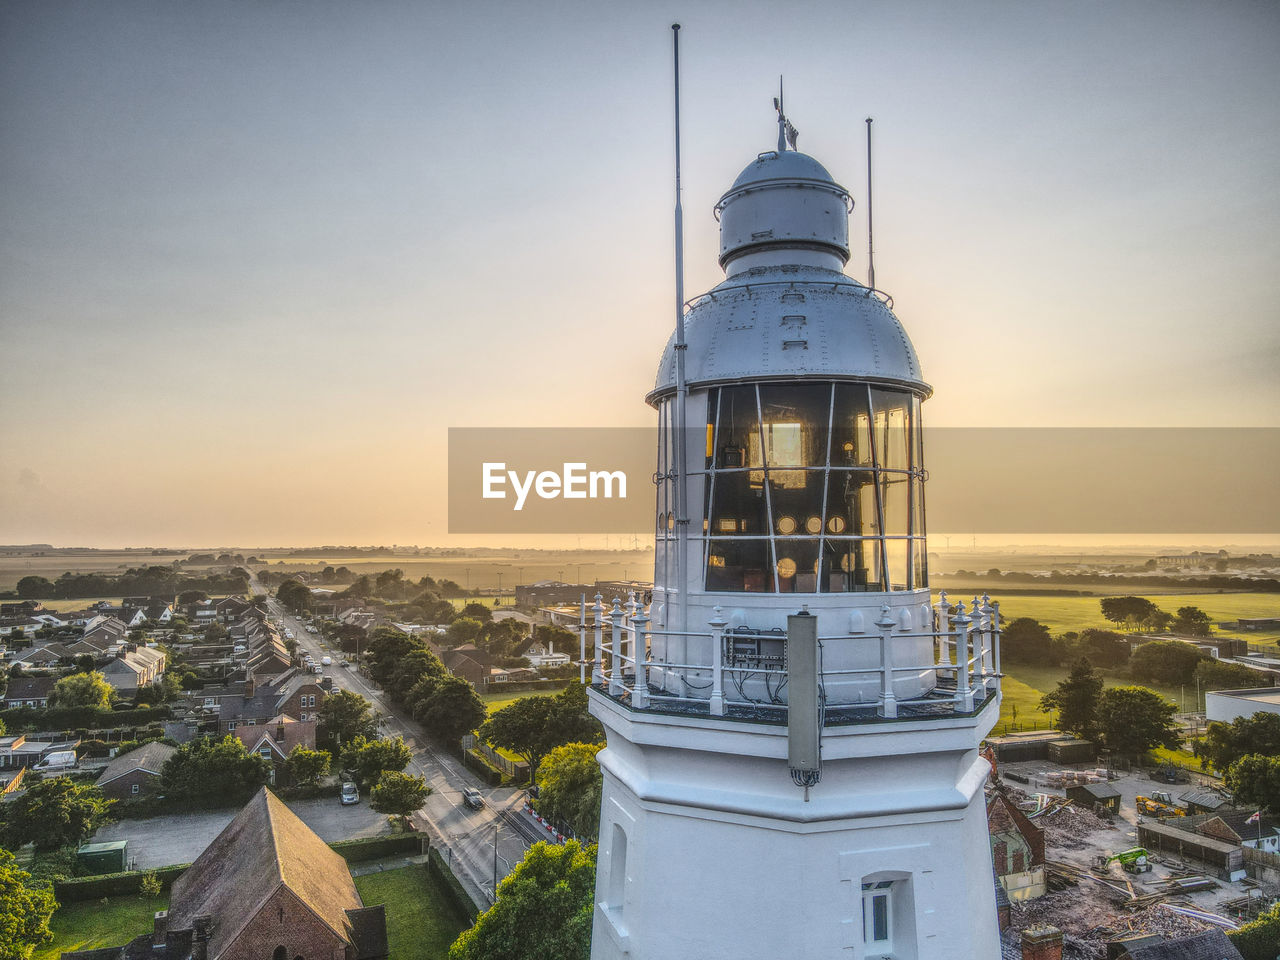 A drone view through the top of withernsea lighthouse at sunset